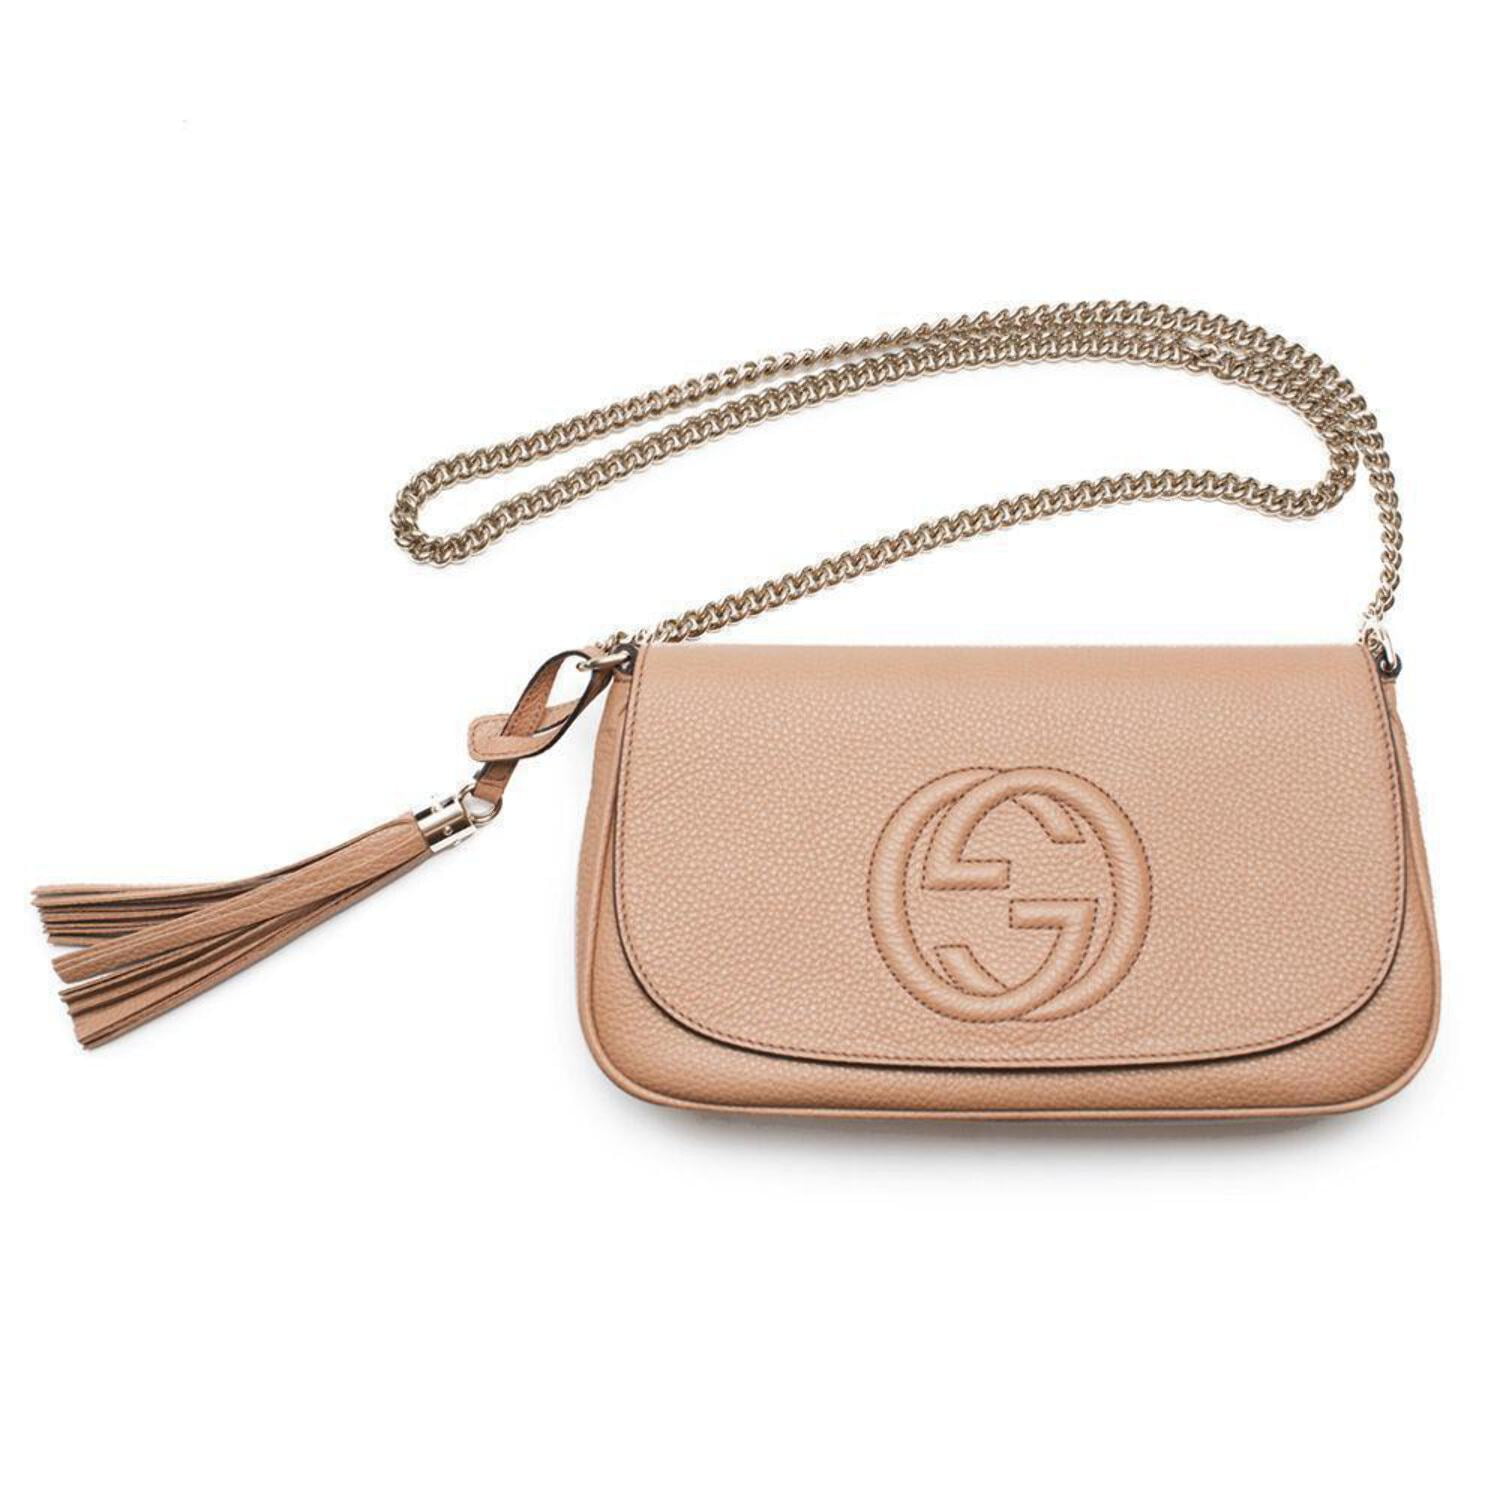 Gucci - Soho Blush Patent Leather Front Flap Chain Bag